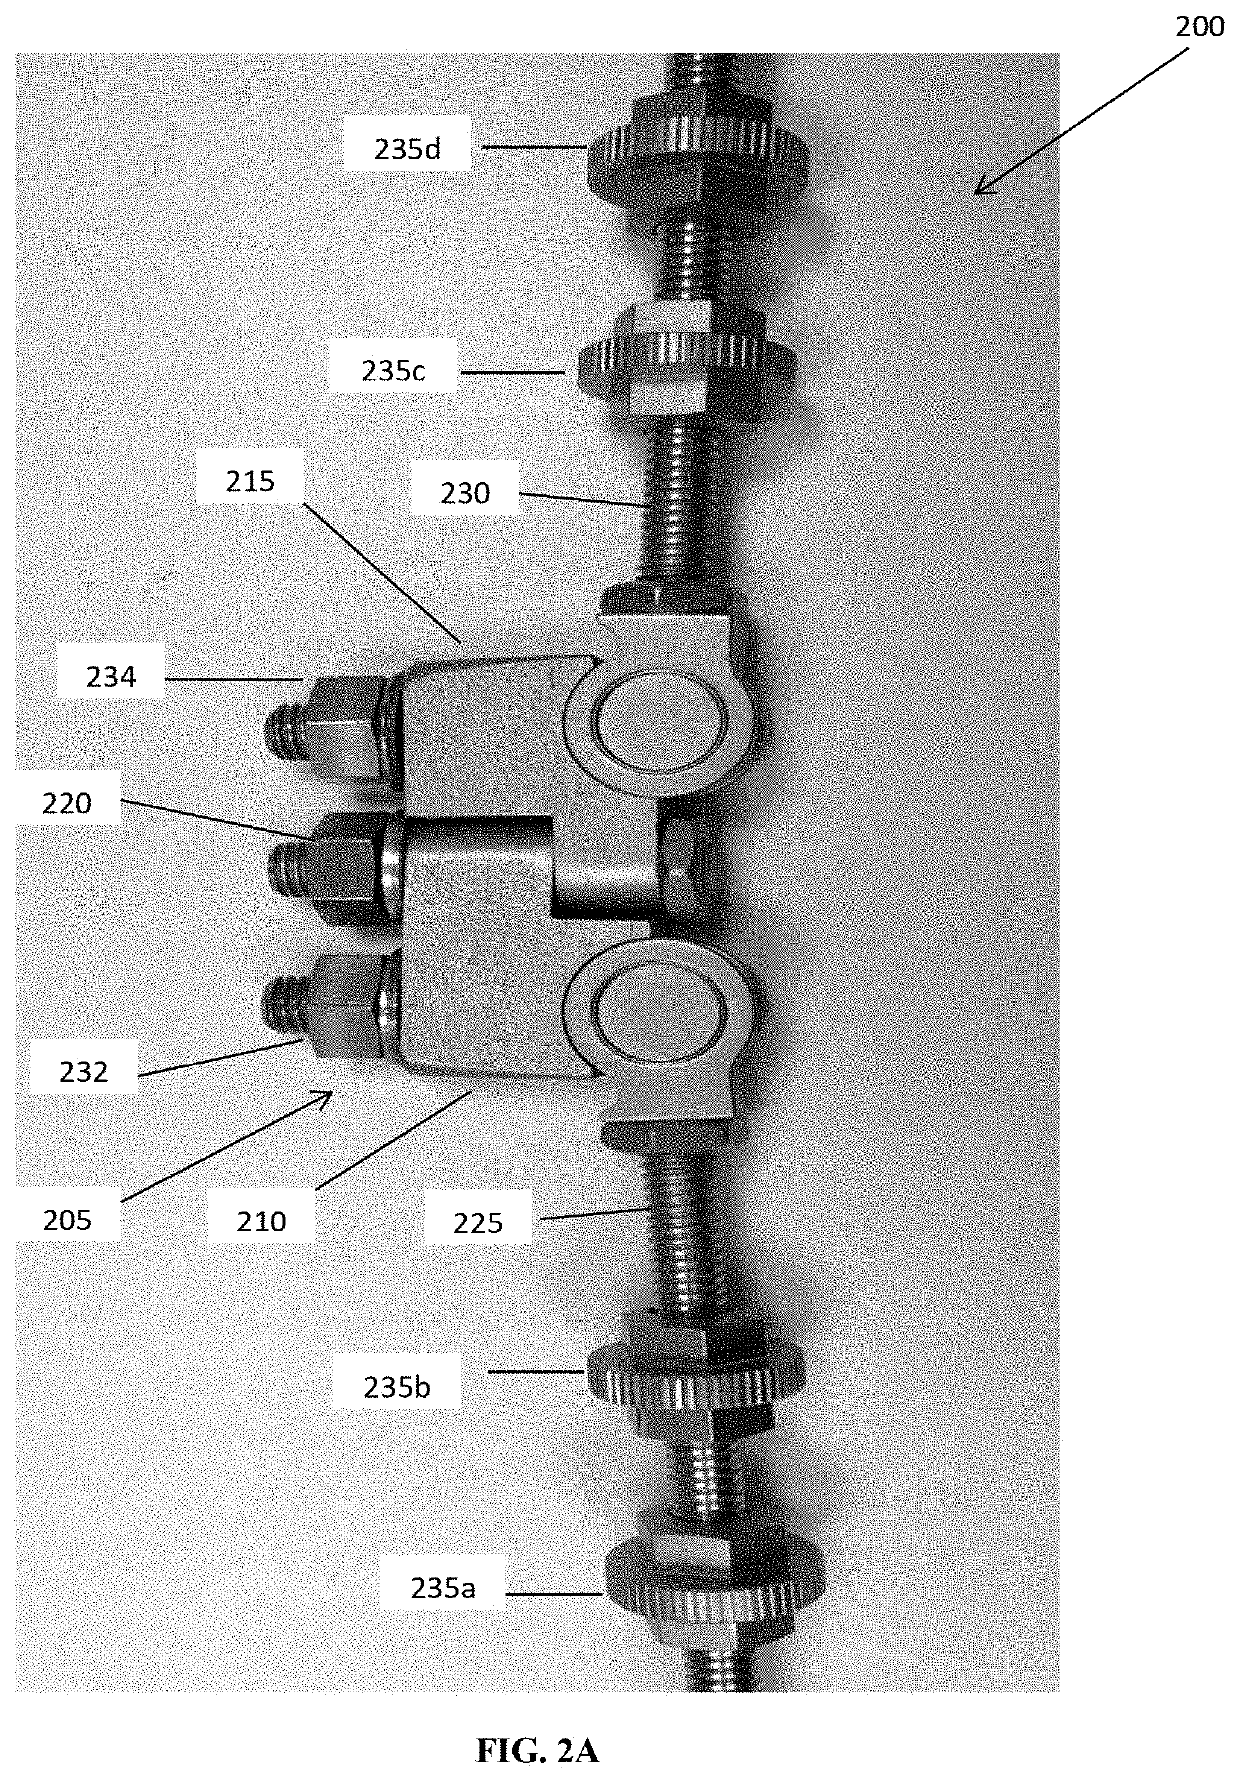 Hinge-link spinal correction device and method